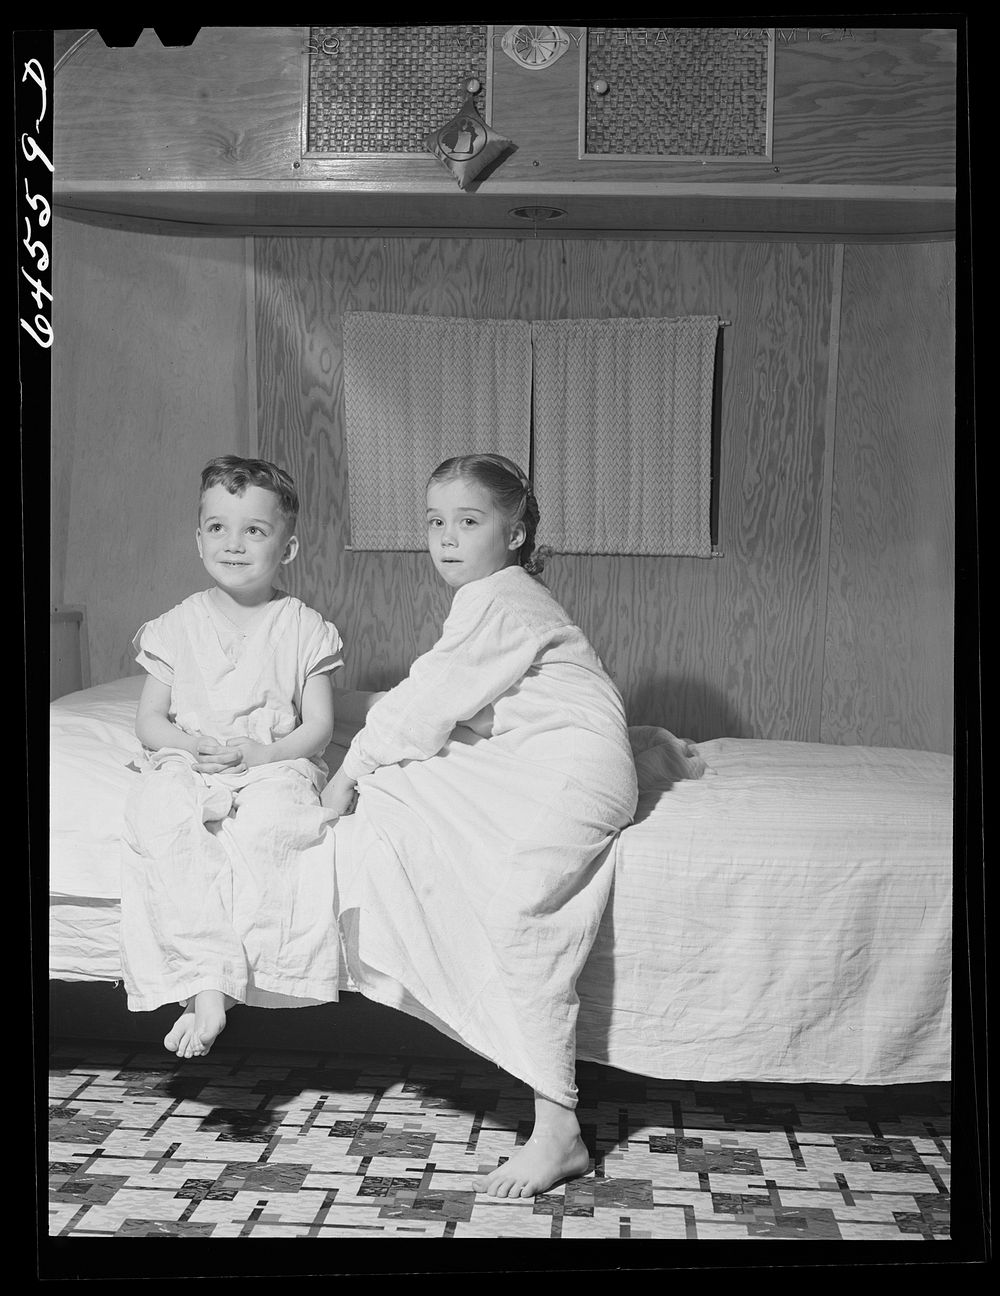 Burlington, Iowa. Acres unit, FSA (Farm Security Administration) trailer camp. Cecil Patrick's kids going to bed in their…